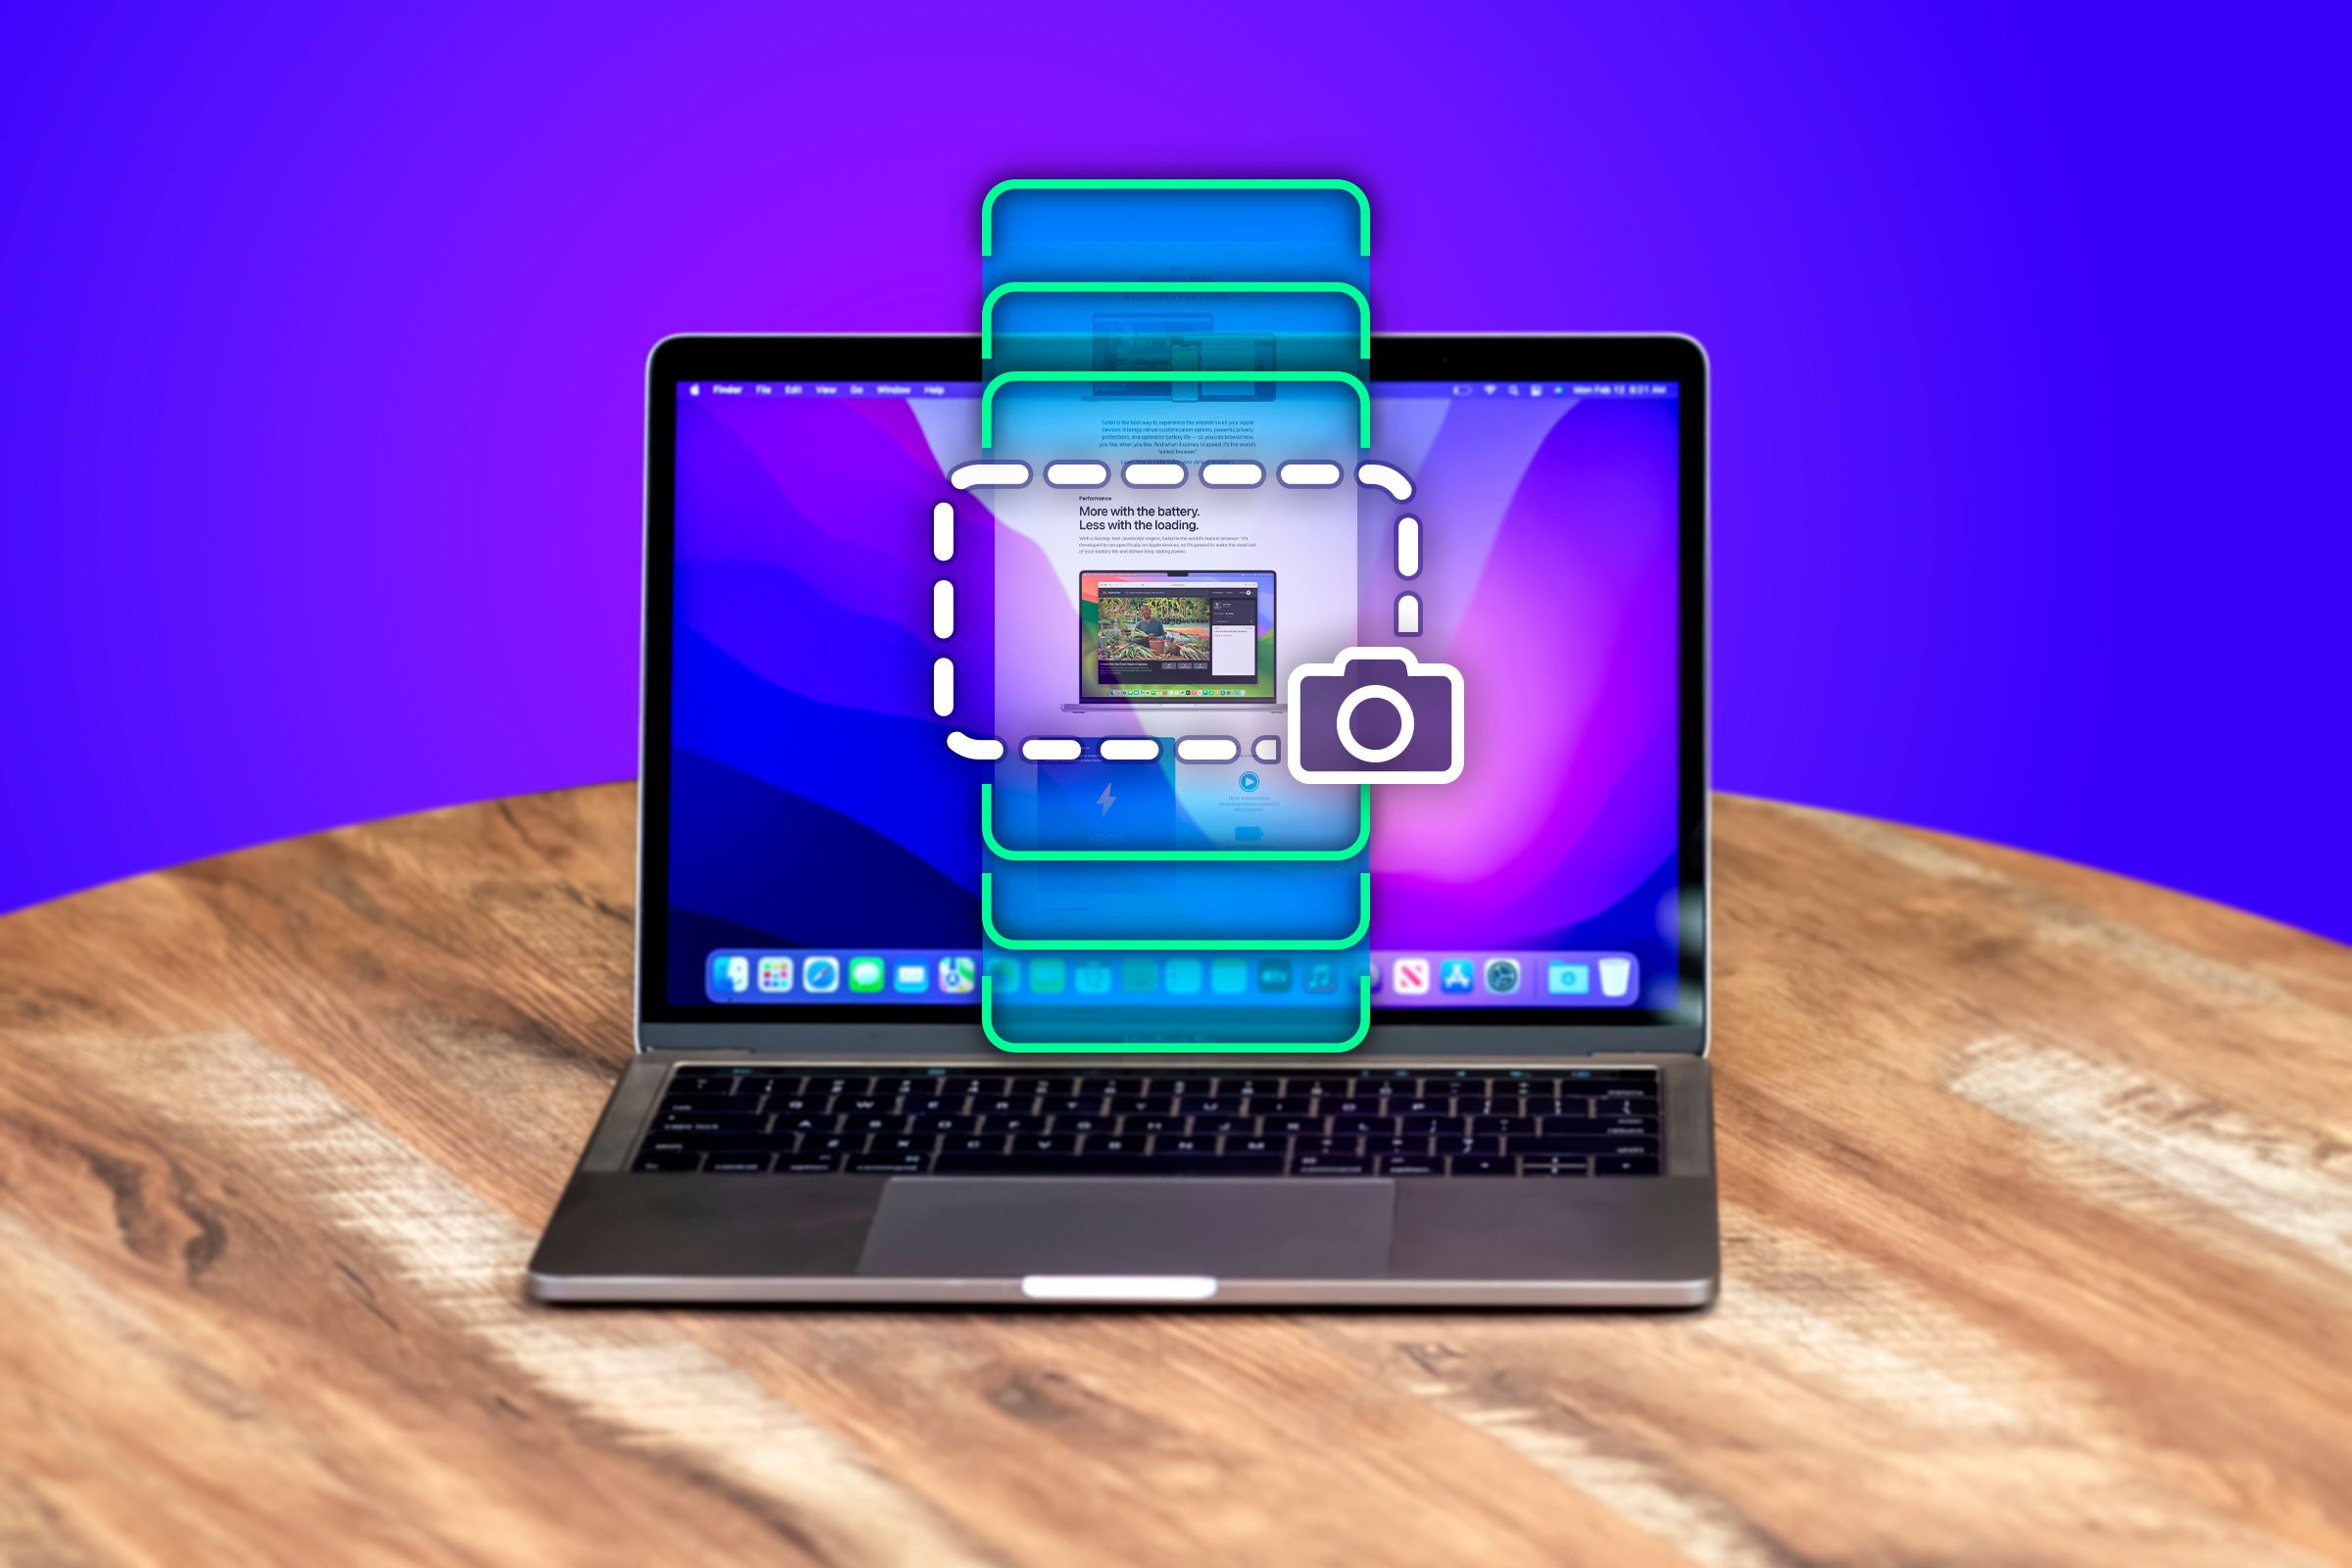 A MacBook Air under a wooden table with the MacOS home screen and an illustration representing the scrolling screenshot, in the center